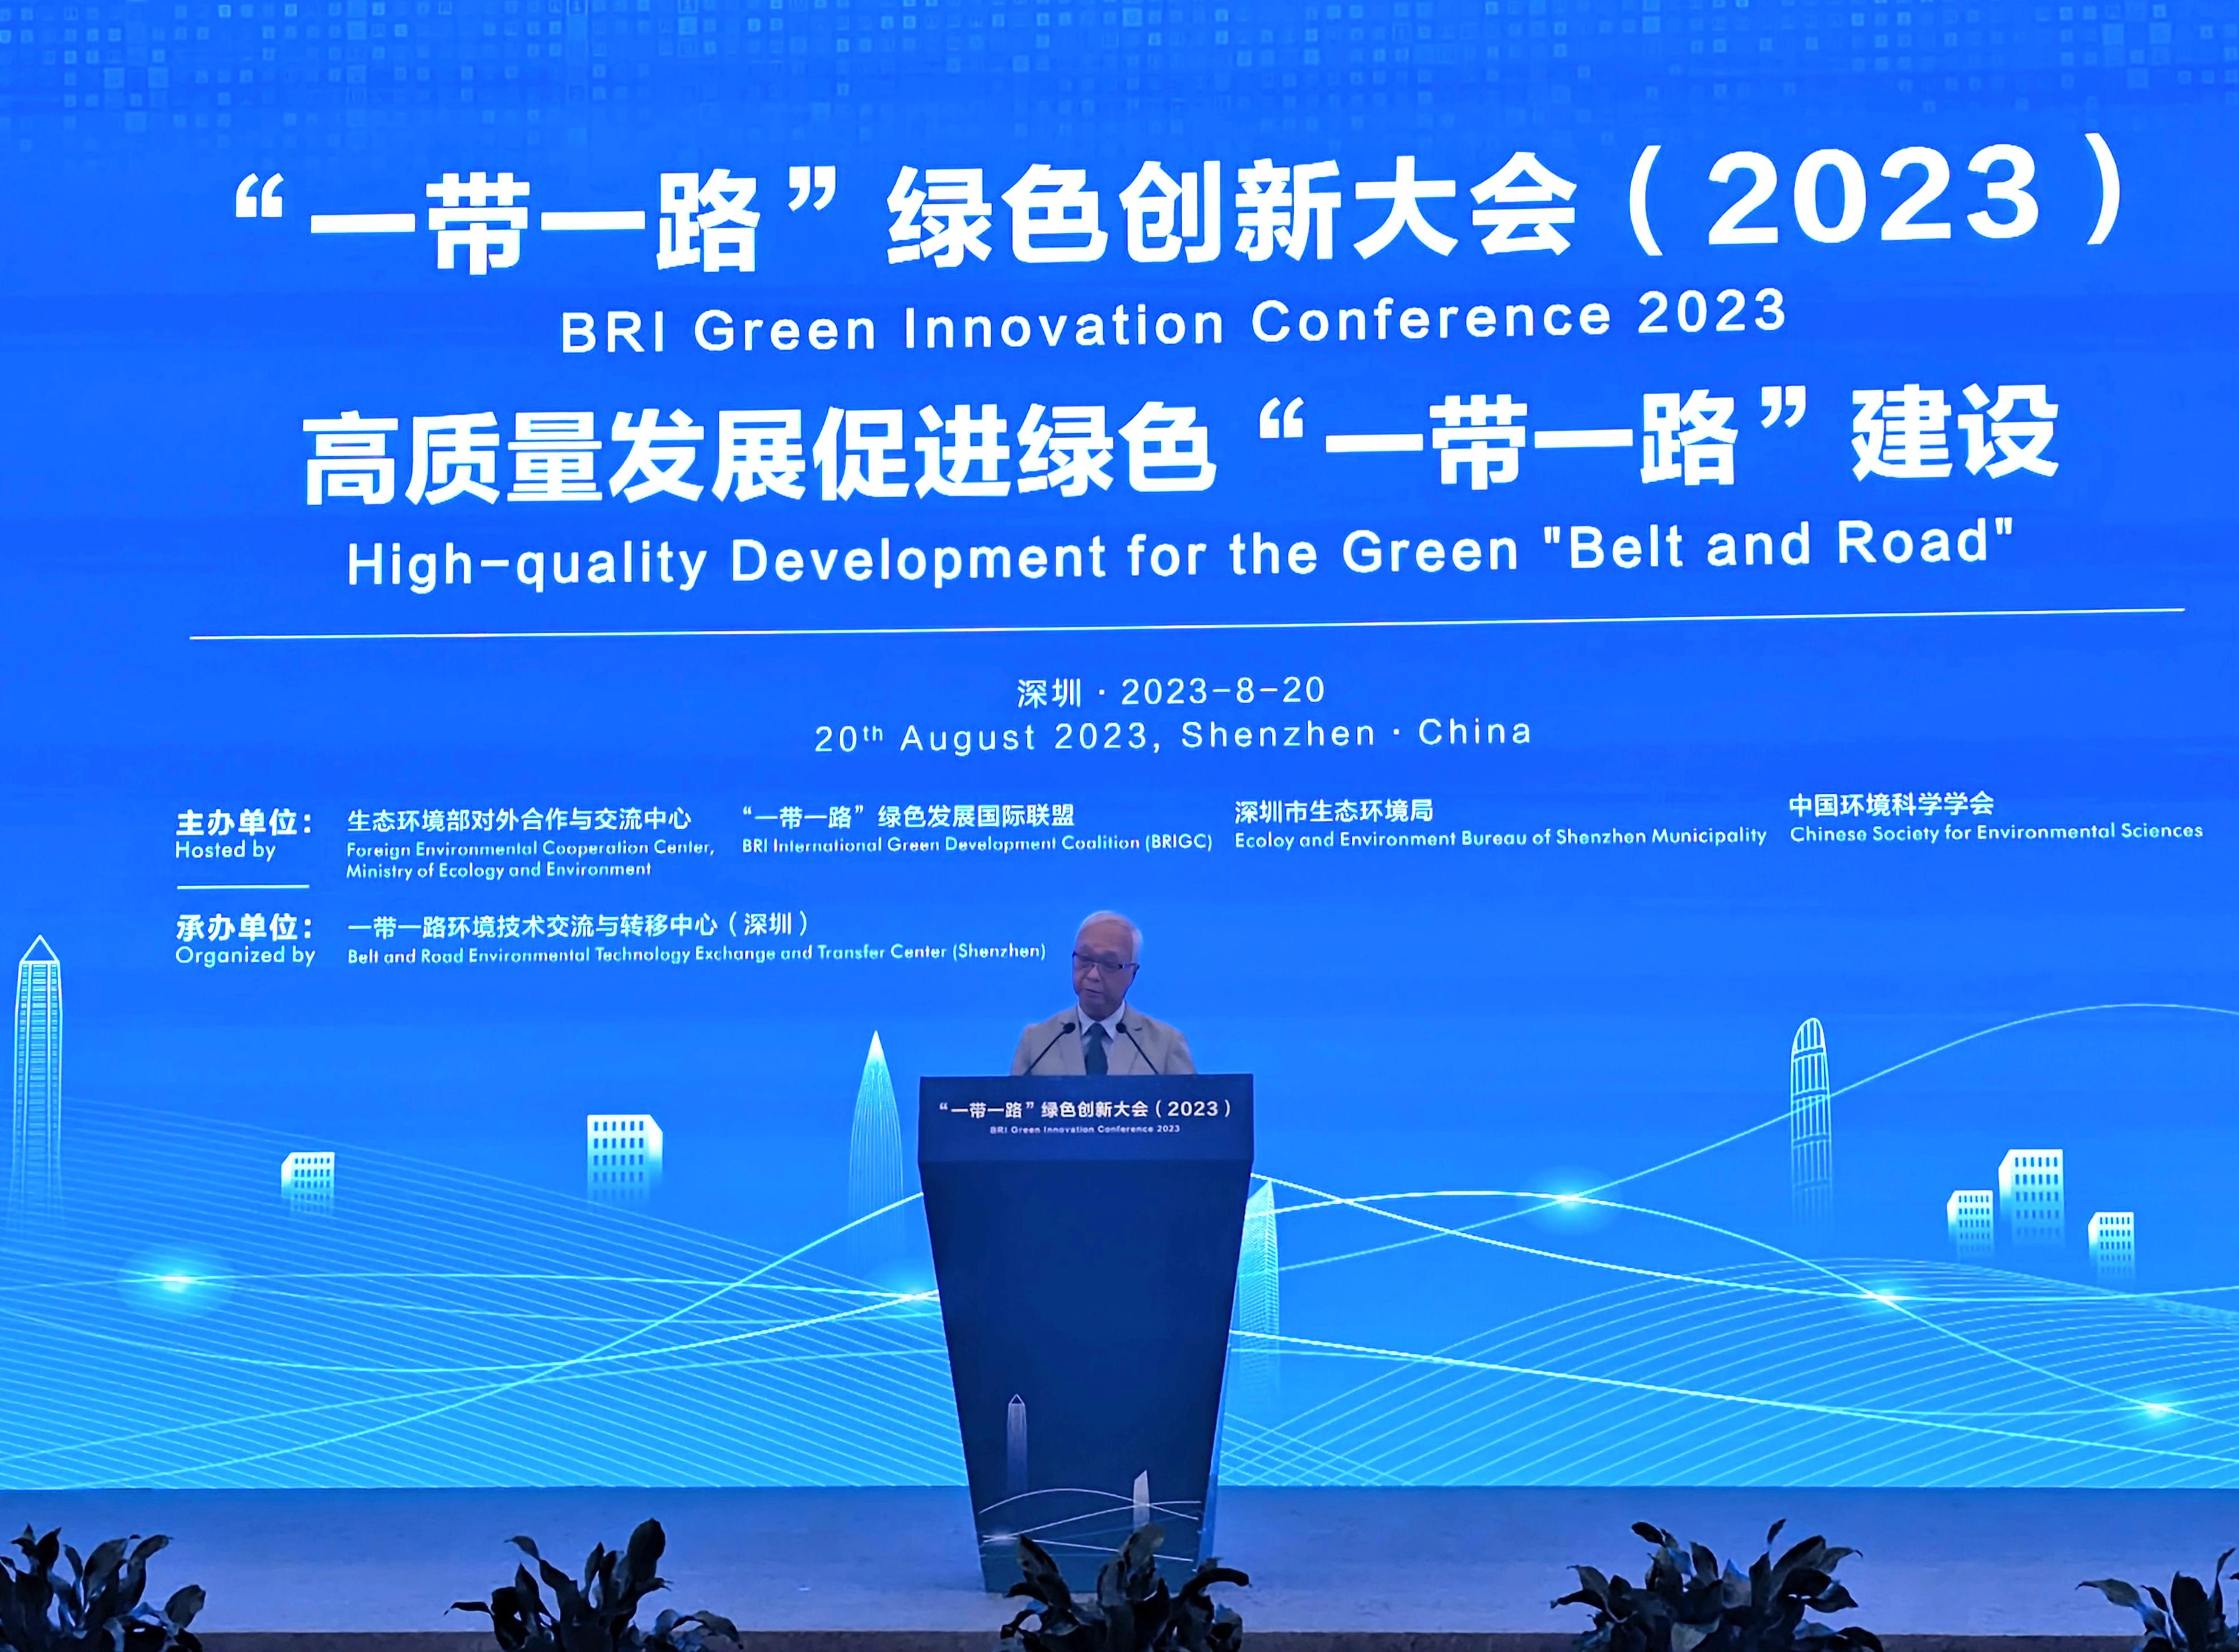 The Secretary for Environment and Ecology, Mr Tse Chin-wan, attended the BRI Green Innovation Conference (2023) held in Shenzhen today (August 20) to share experiences in green innovation with the Belt and Road counterparts, foster mutual learning and exchange views. Photo shows Mr Tse delivering his speech at the opening ceremony.